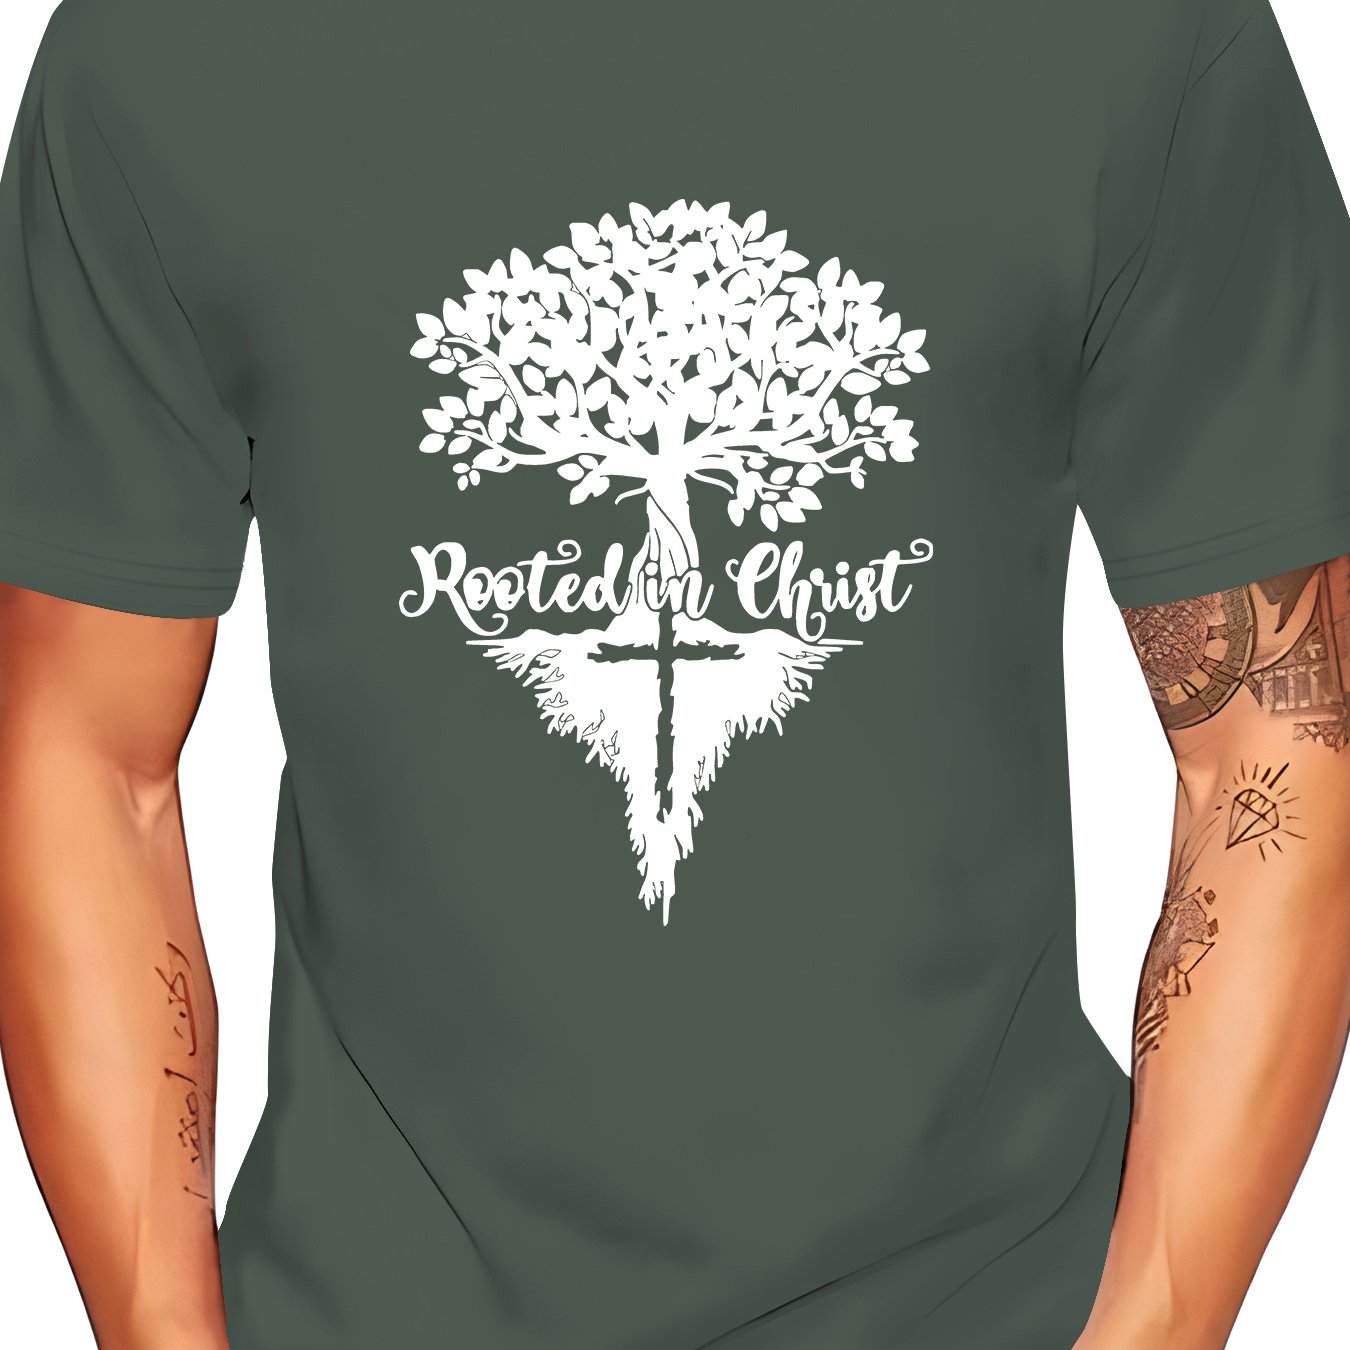 Rooted In Christ Men's Christian T-shirt claimedbygoddesigns